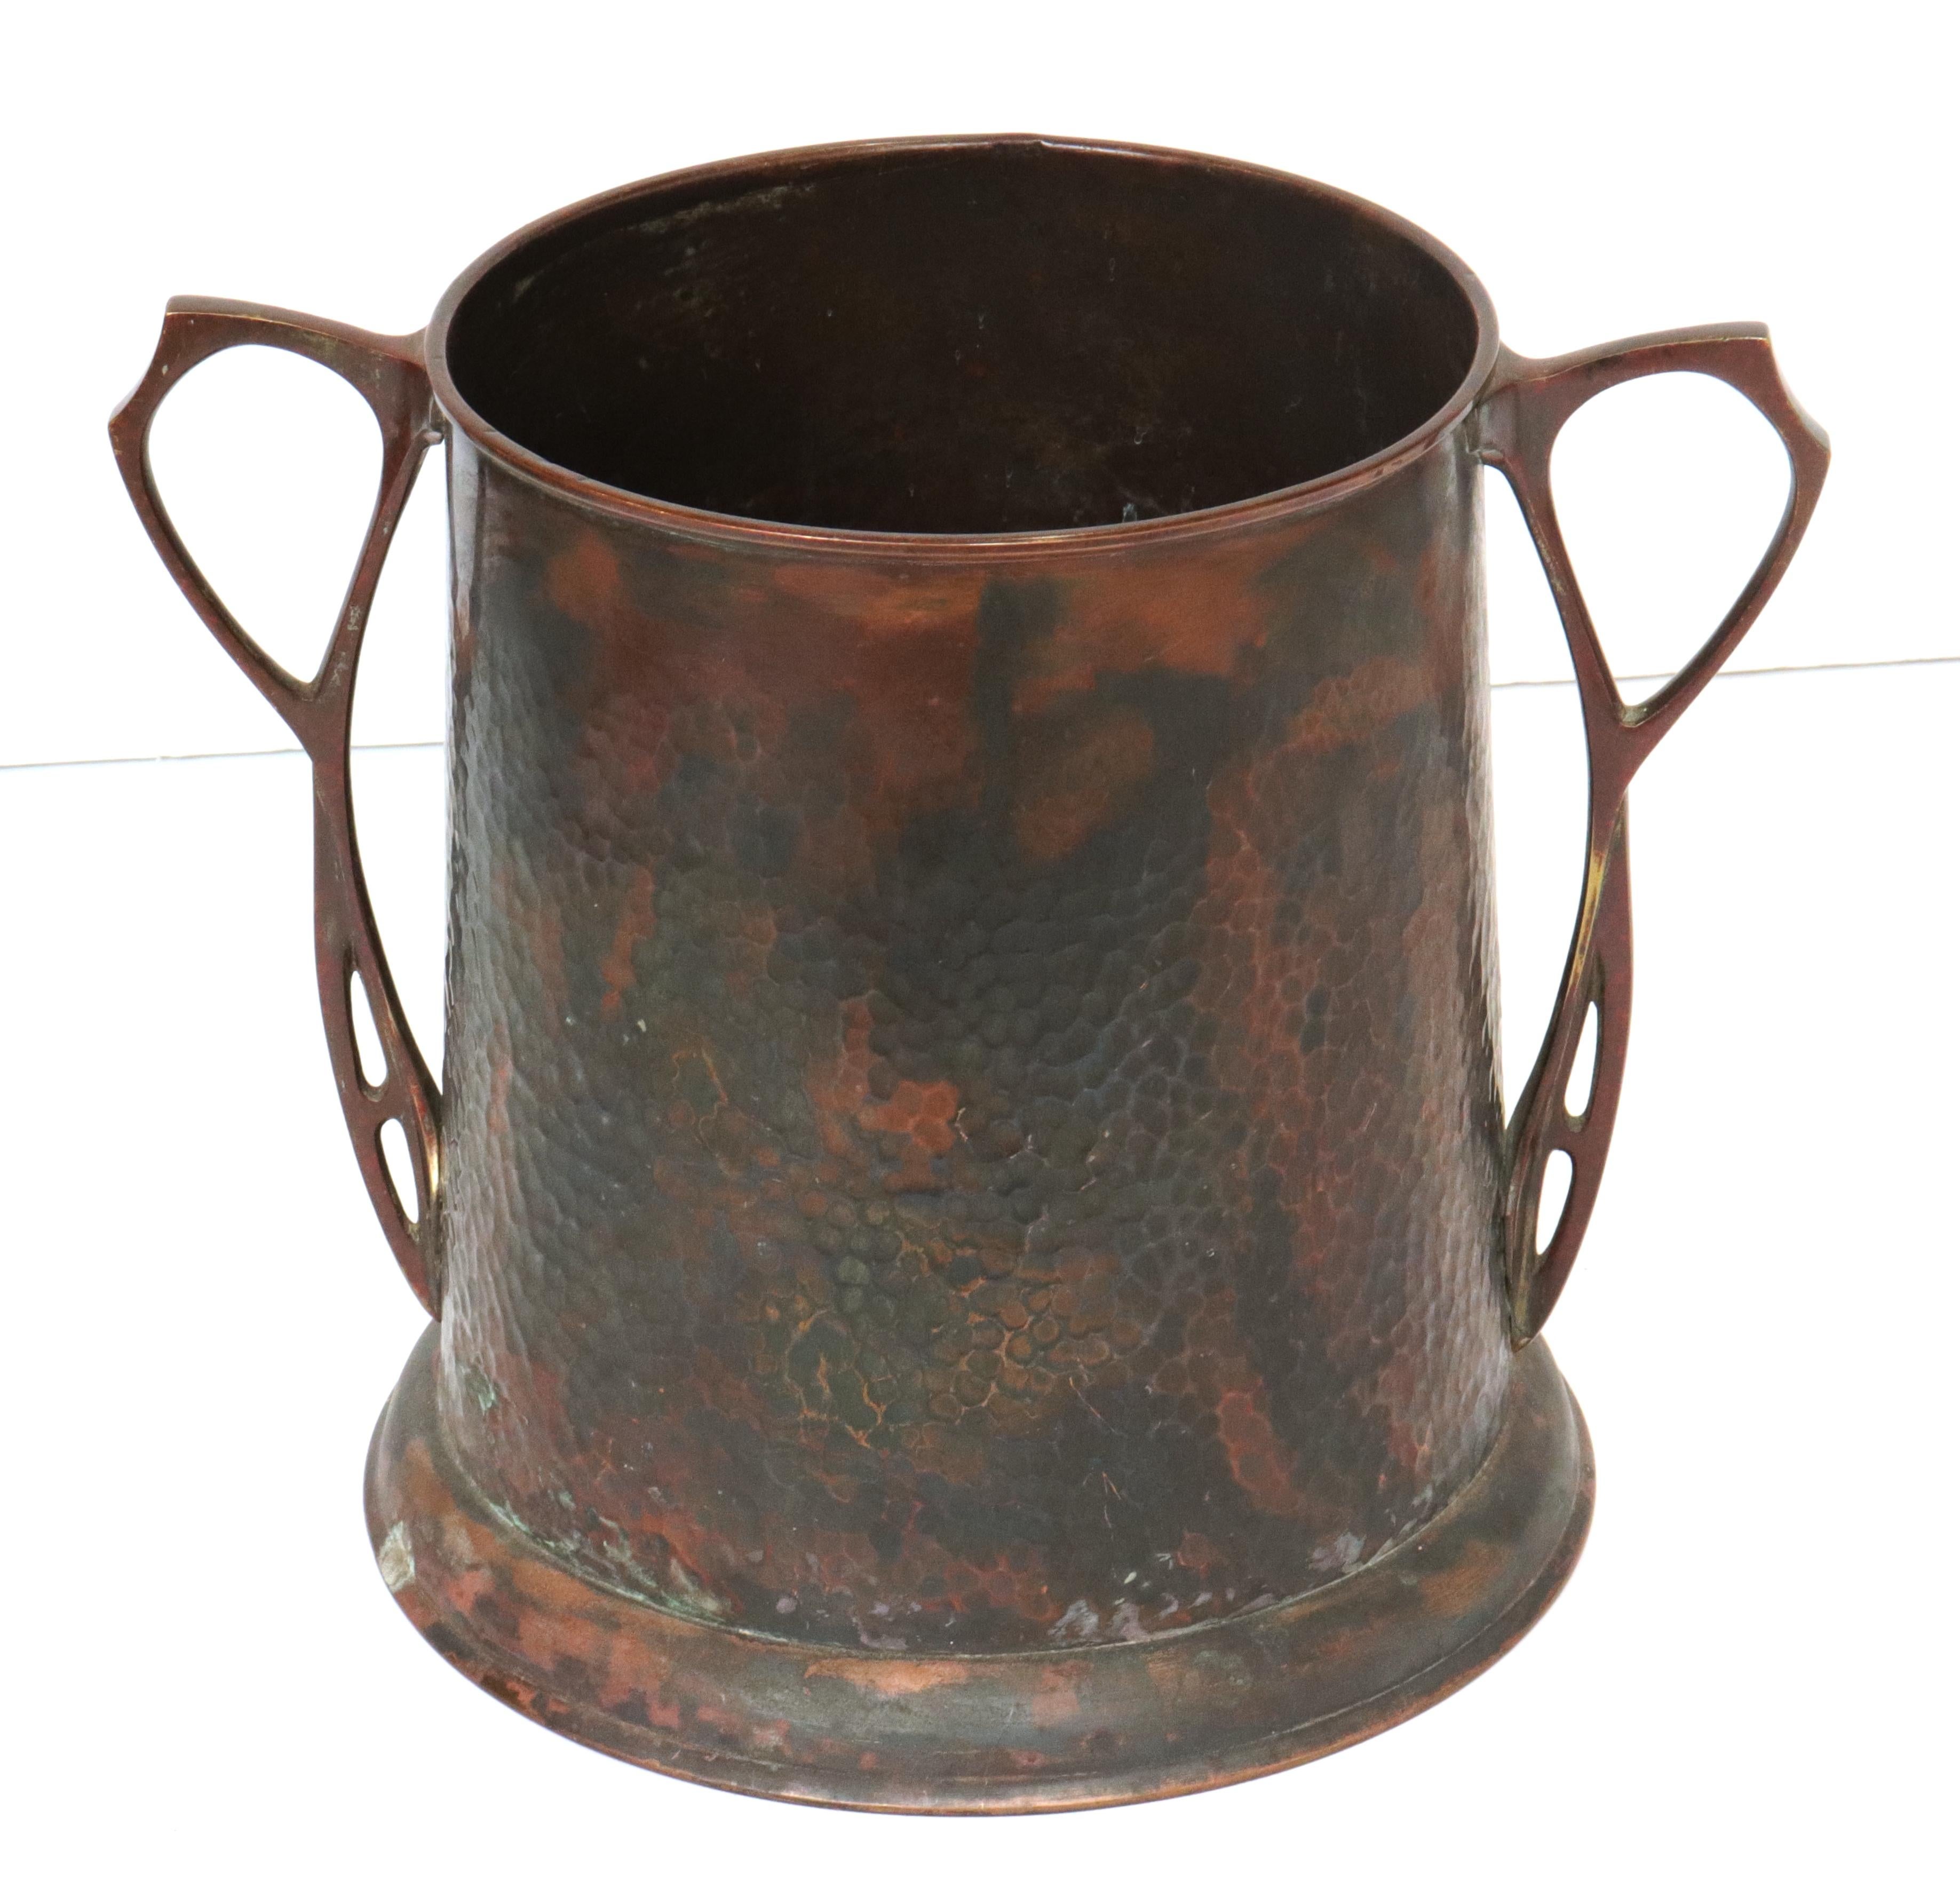 German Jugendstil wine cooler or Champagne bucket made by manufacturer Carl Deffner of Esslingen. The piece is made of hammered copper and cast bronze and bears the makers mark C.D.E. on the bottom. In great antique condition with age-appropriate